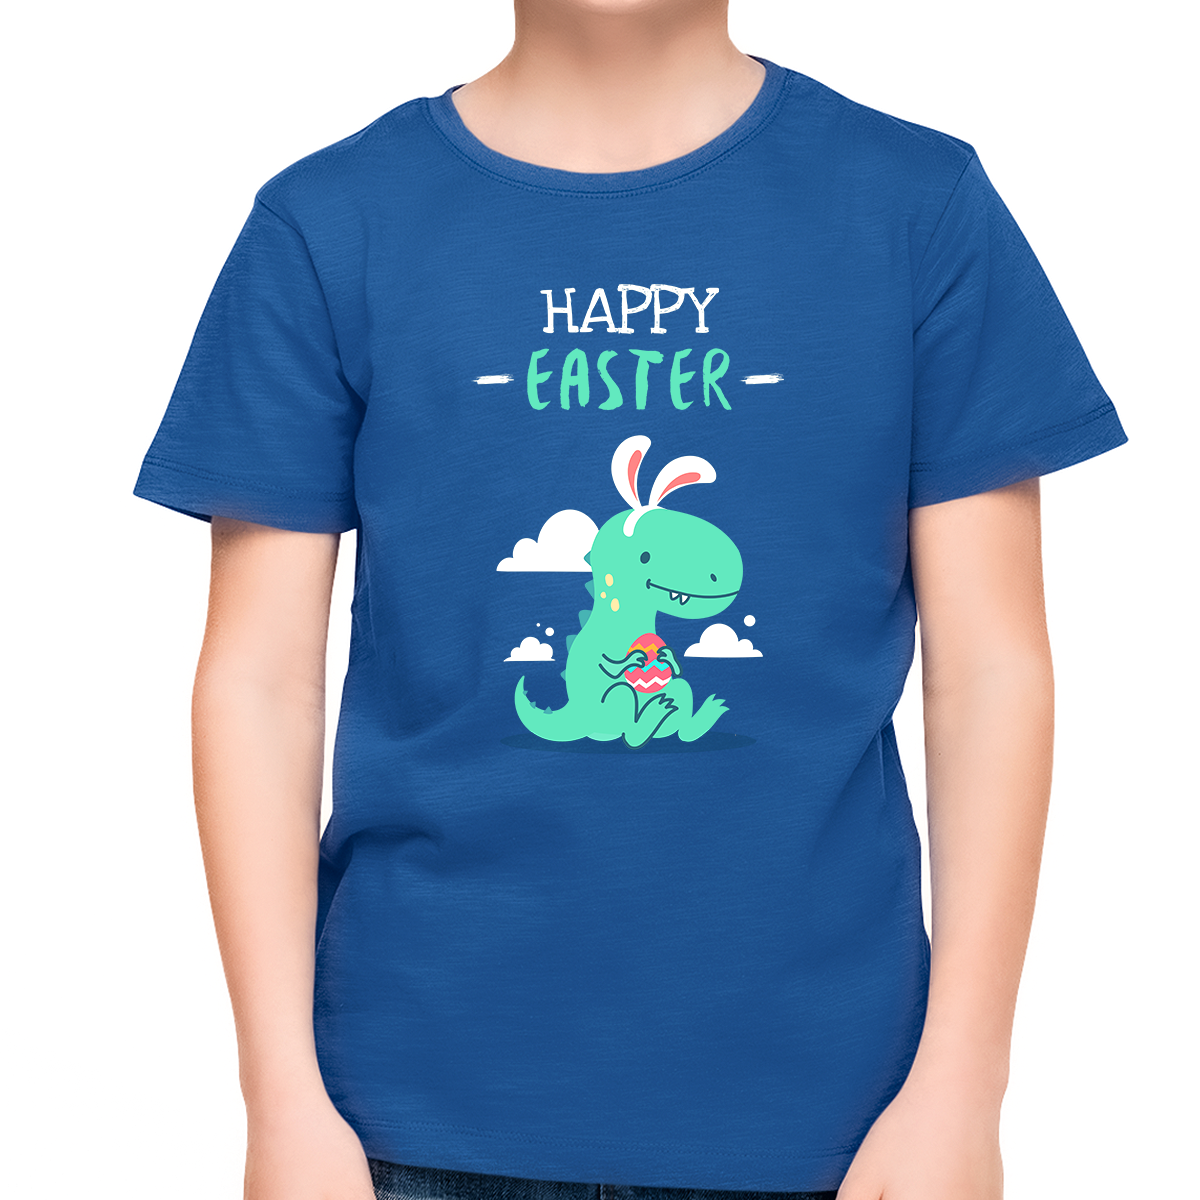 Boys Easter Shirt Dino Kids Easter Outfits Dinosaur Easter Shirts for Boys